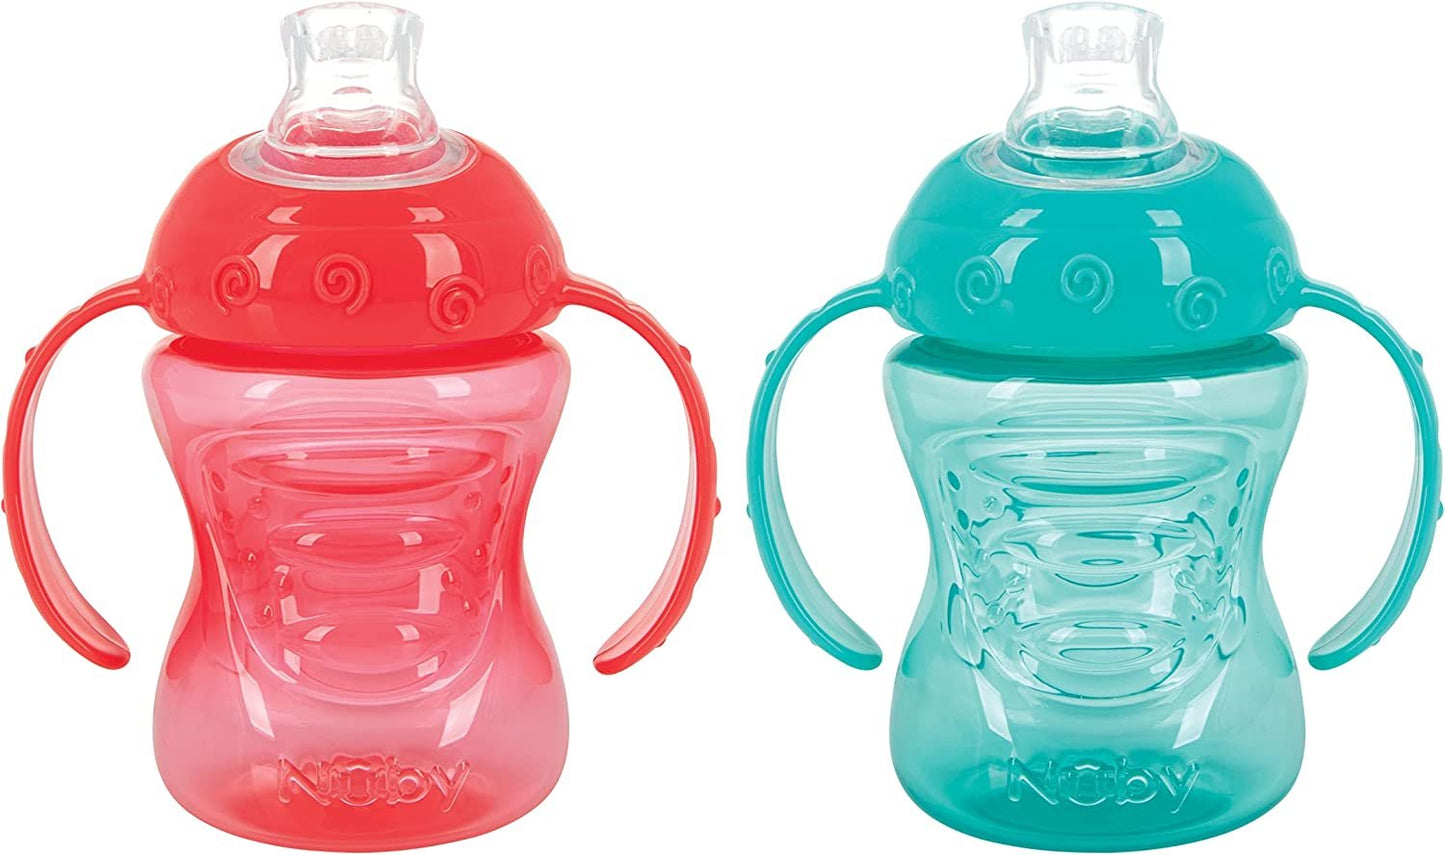 Nuby Two-Handle No-Spill Super Spout Grip N' Sip Cups, 8 Ounce (2 Count, Coral, Aqua)